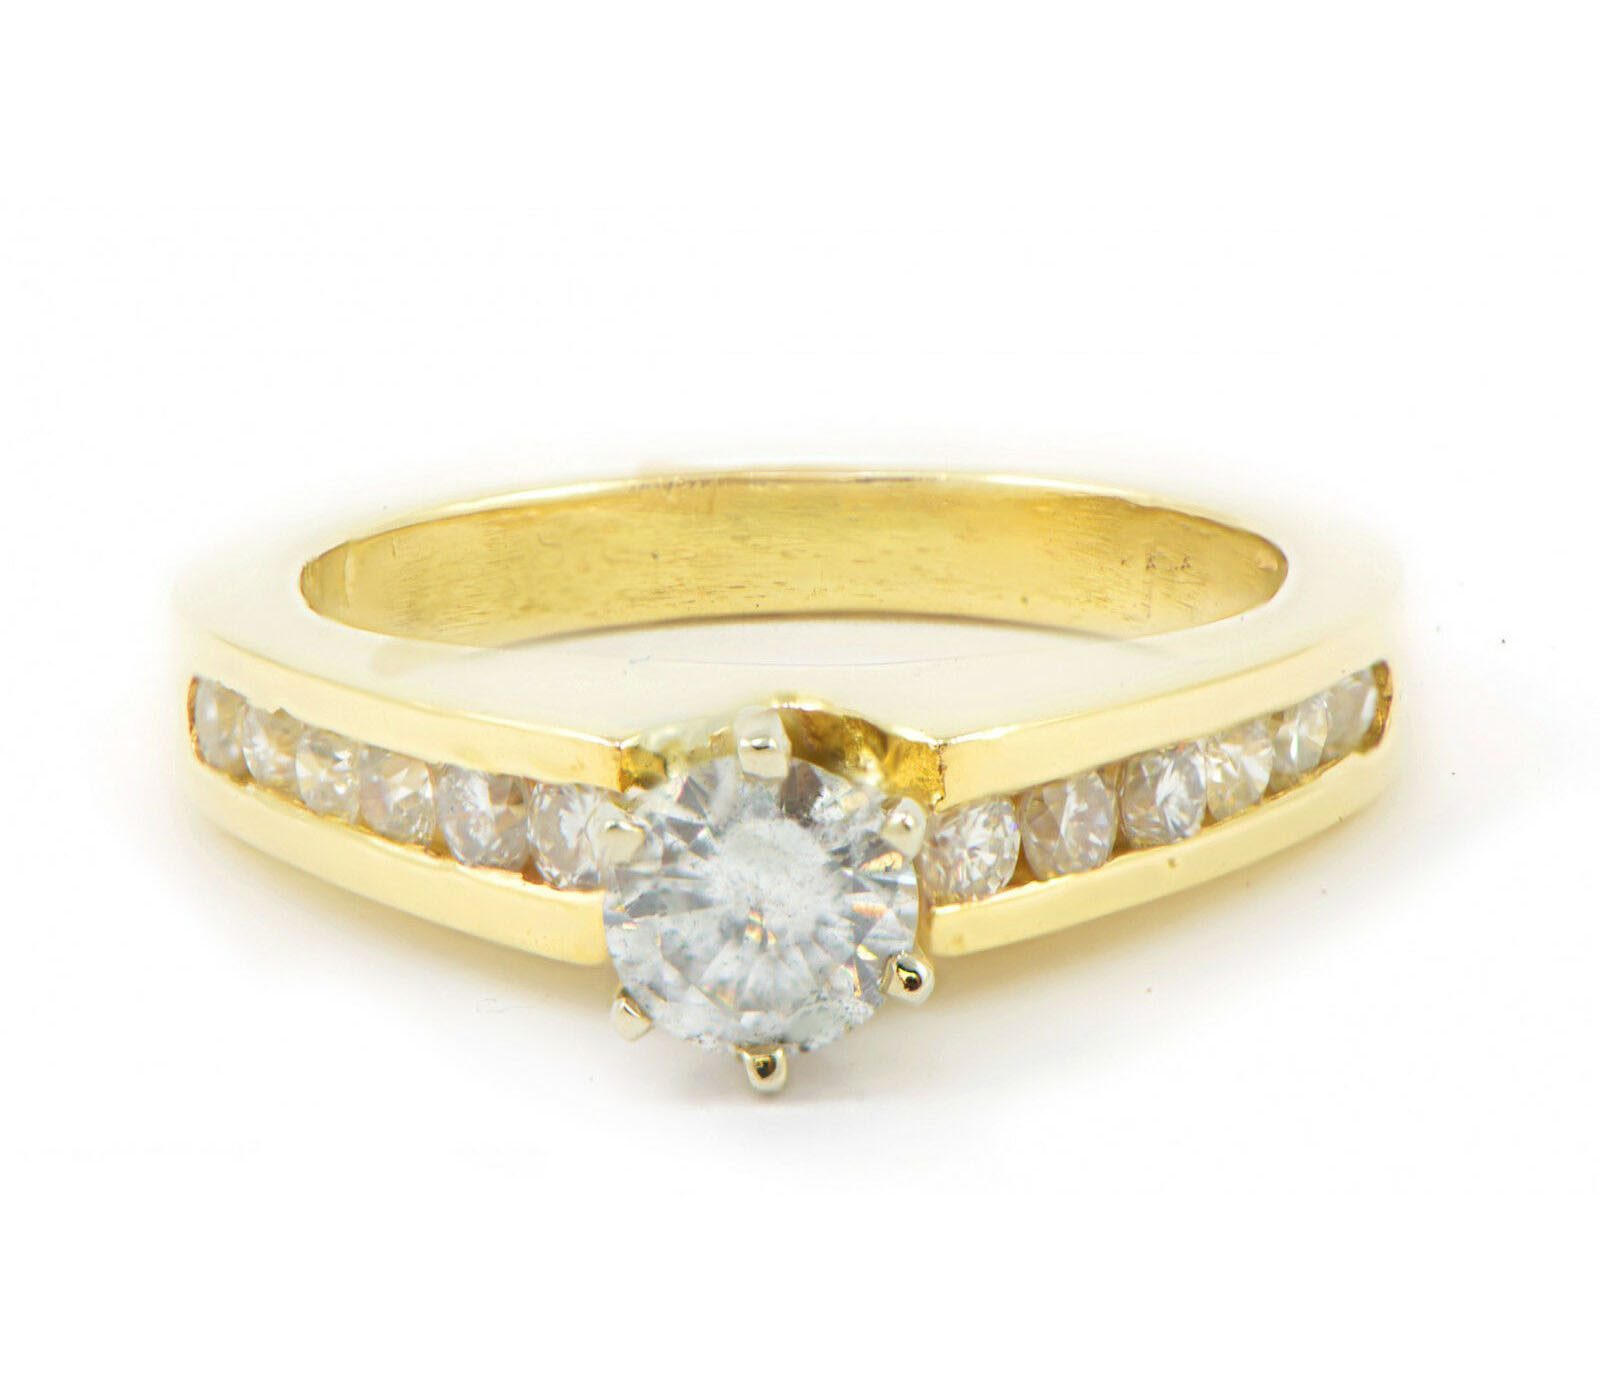 Round-Diamond-Engagement-Ring-Tapering-Side-in-14k-Yellow-Gold-78-ct-TW-SZ-45-112454231590